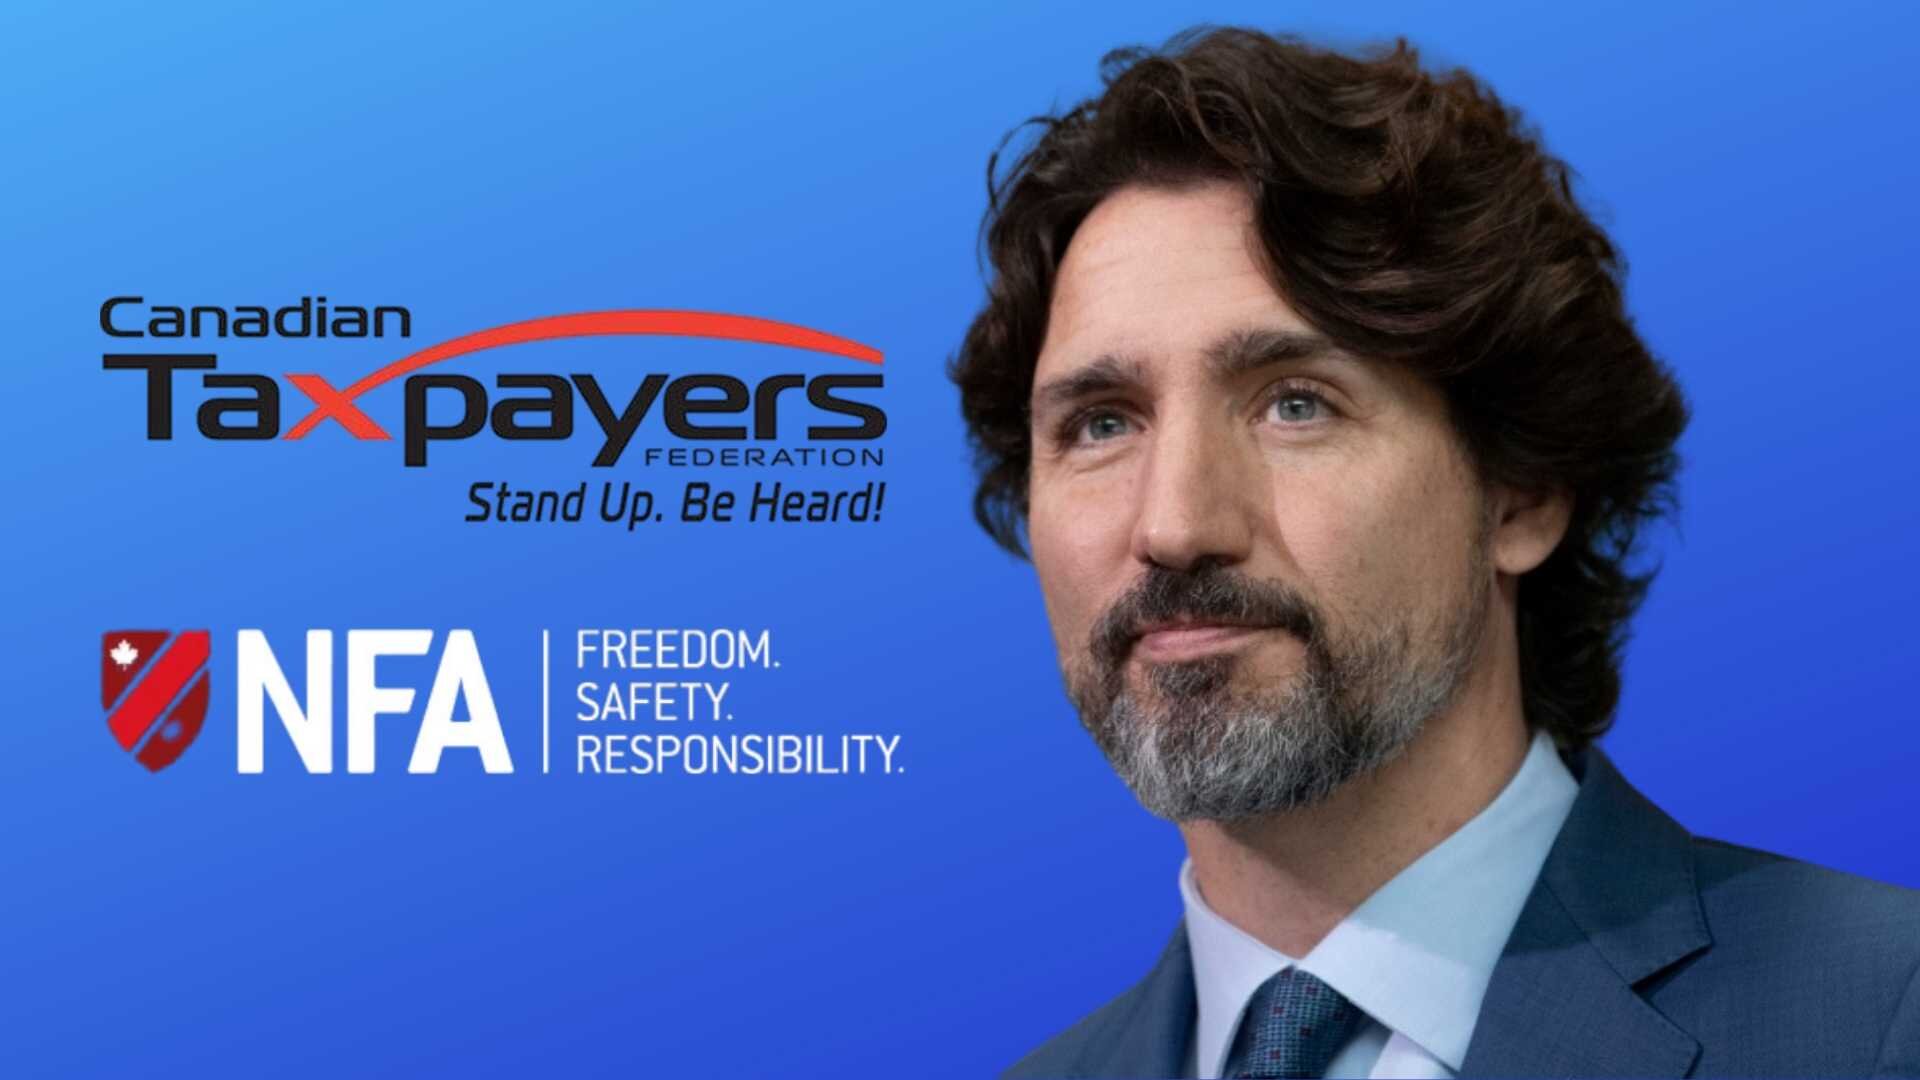 Trudeau pictured with the logos of the CTF and NFA.